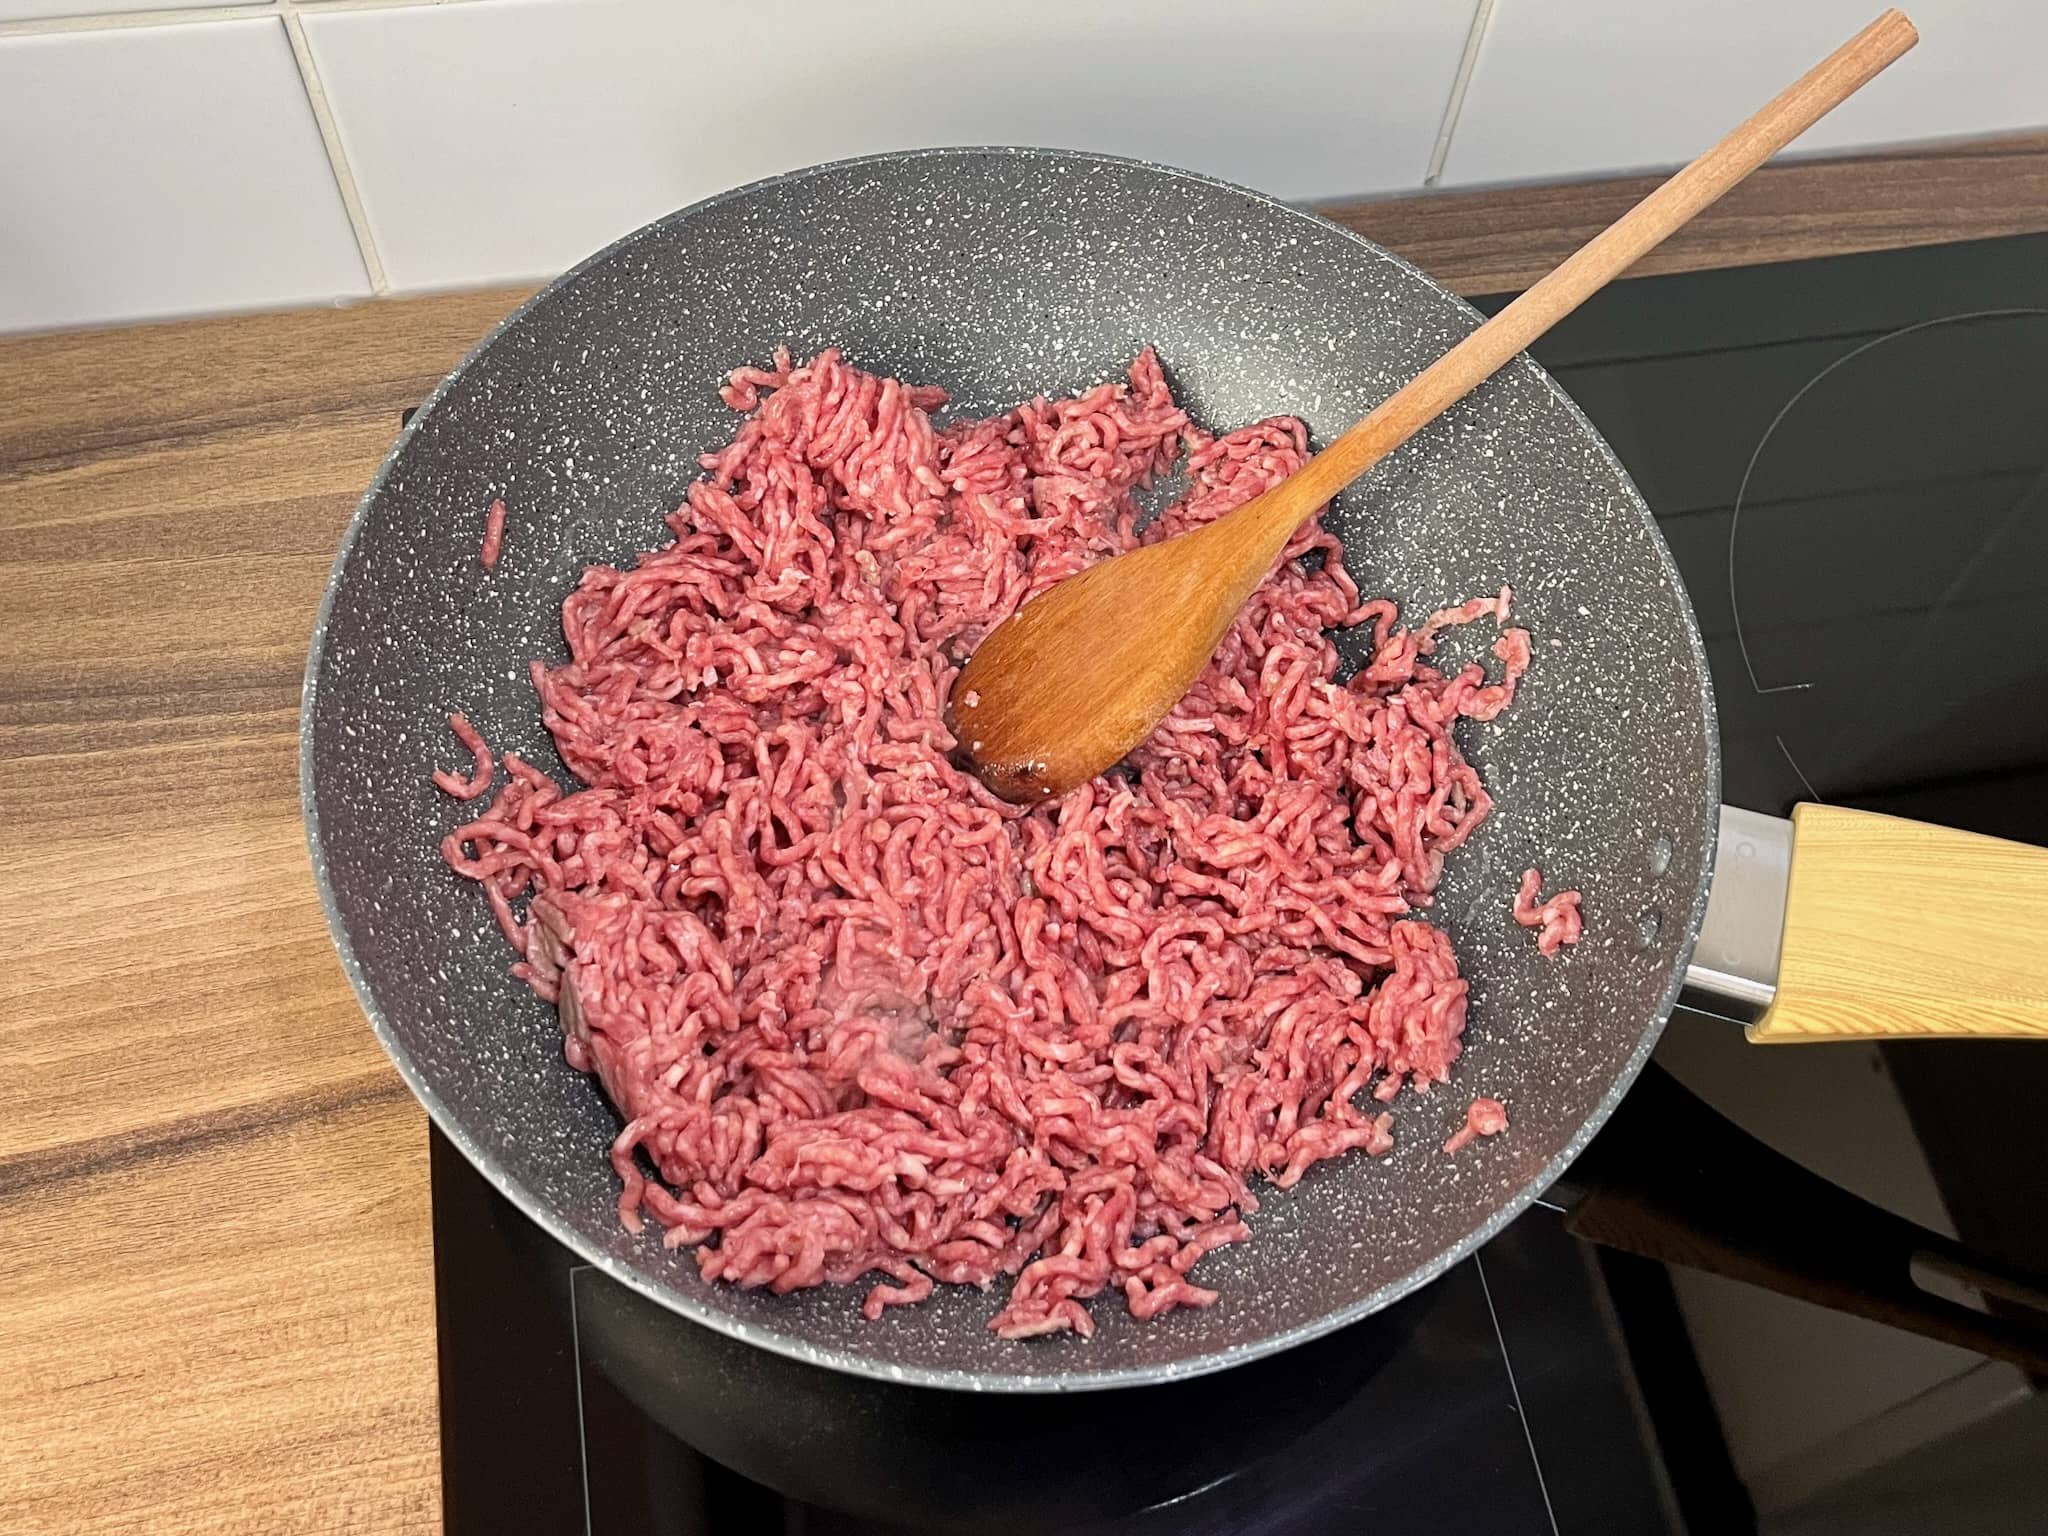 Ground beef is cooking in a frying pan